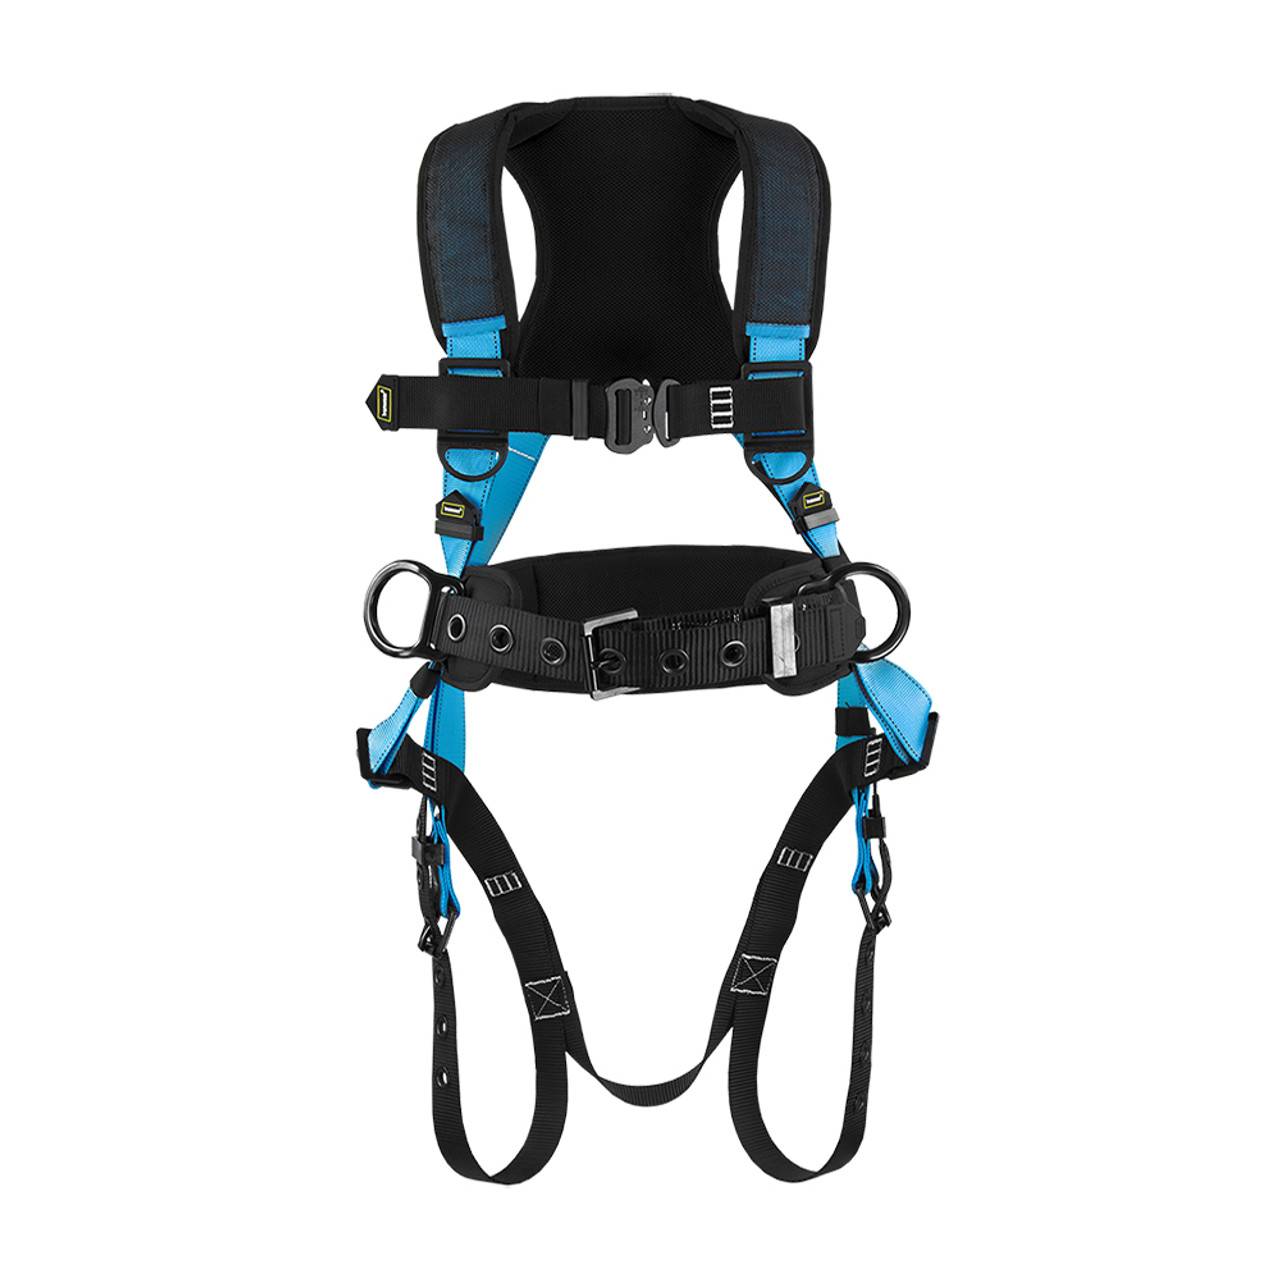 Full Body Harness Belt Suppliers - PPEs and Work Wear Supplier